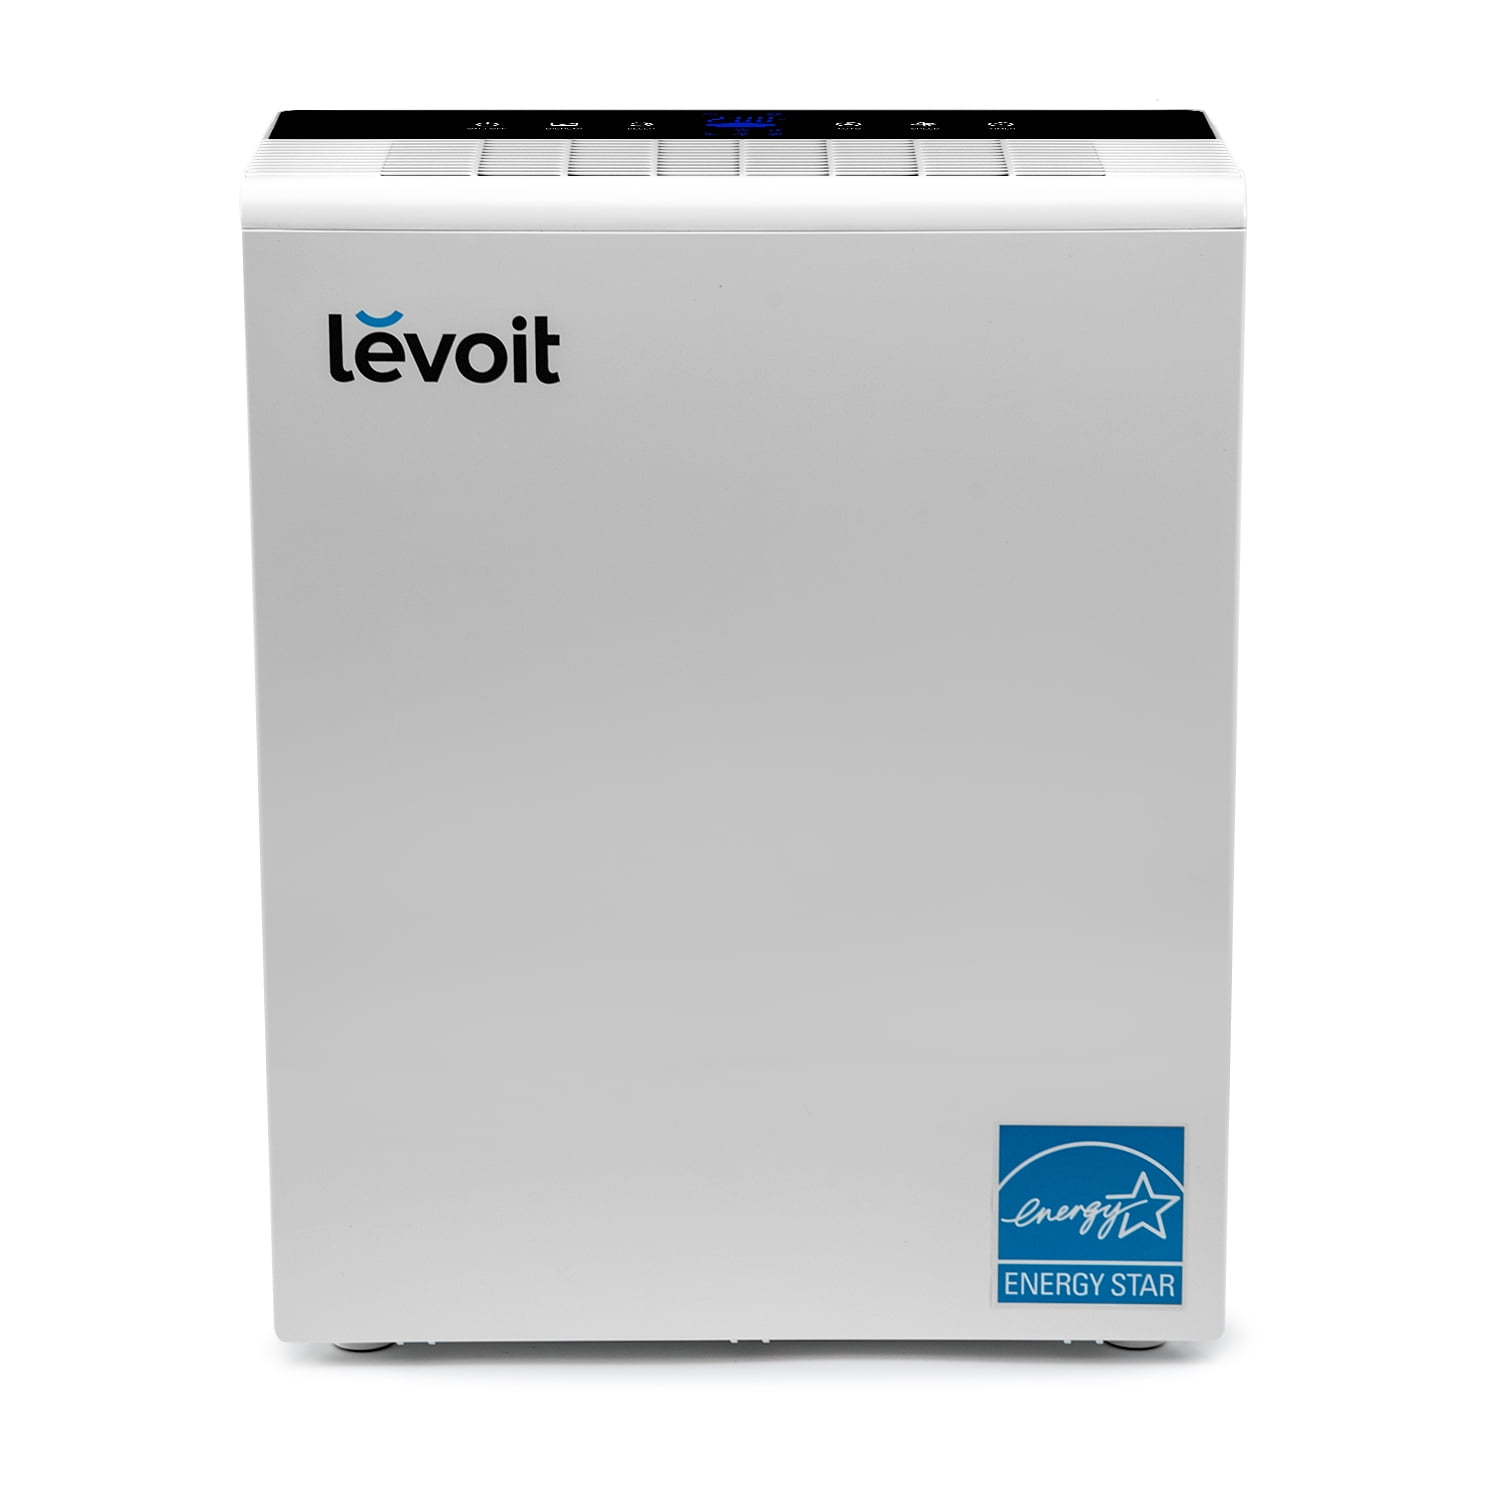 Levoit Air Purifiers For Home CADR 400m³/h, Large Room 83m² with H13 Hepa